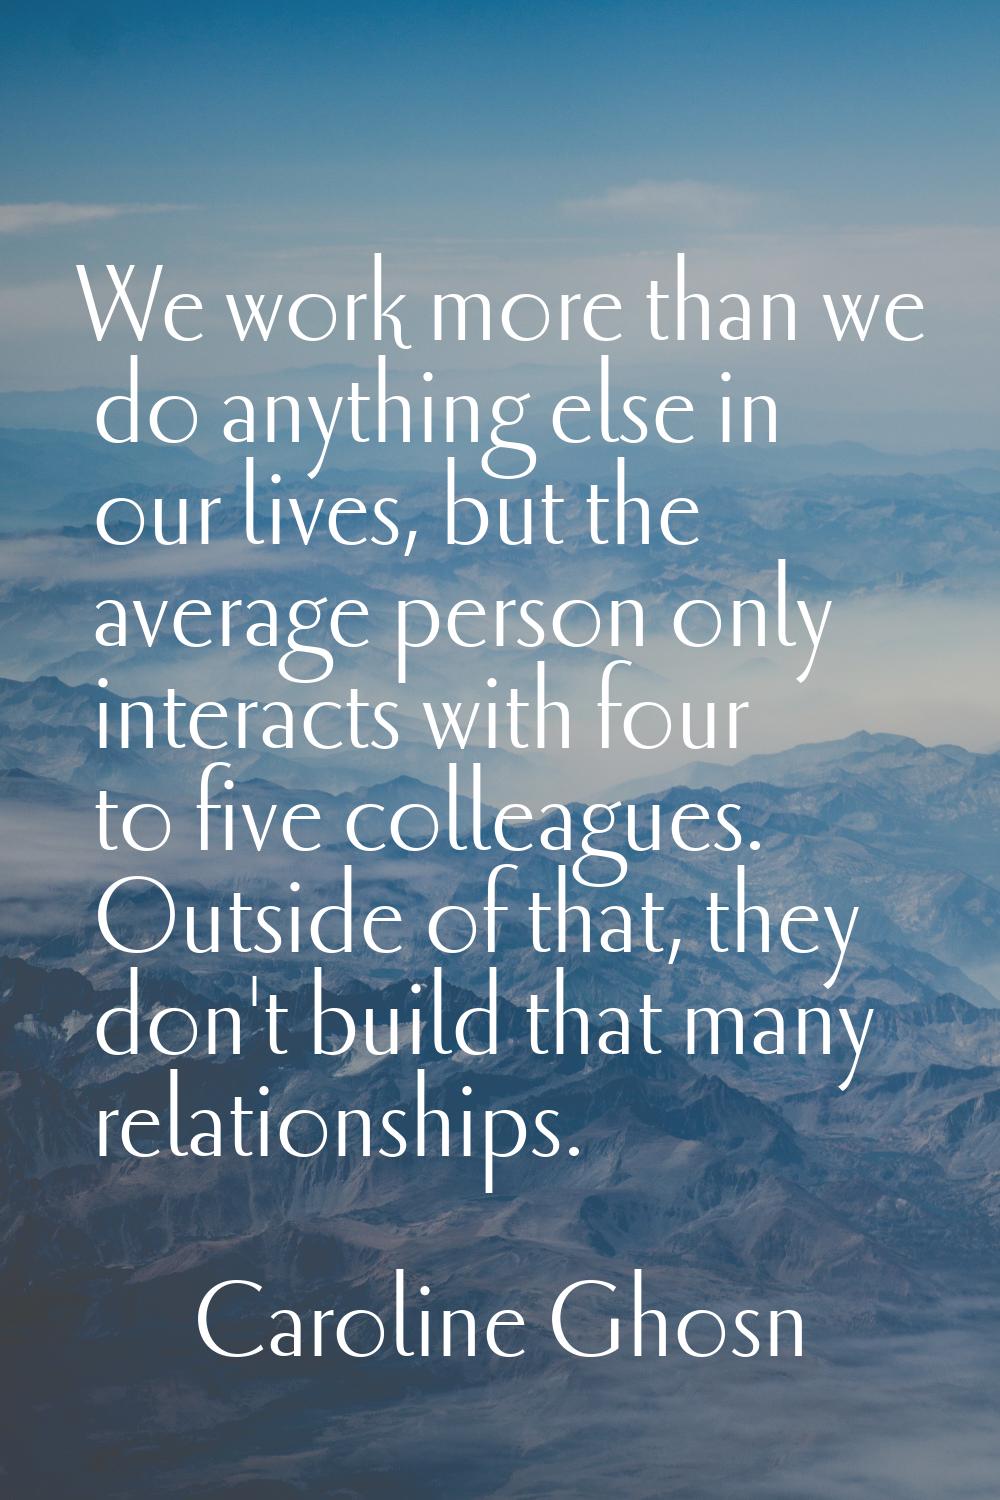 We work more than we do anything else in our lives, but the average person only interacts with four